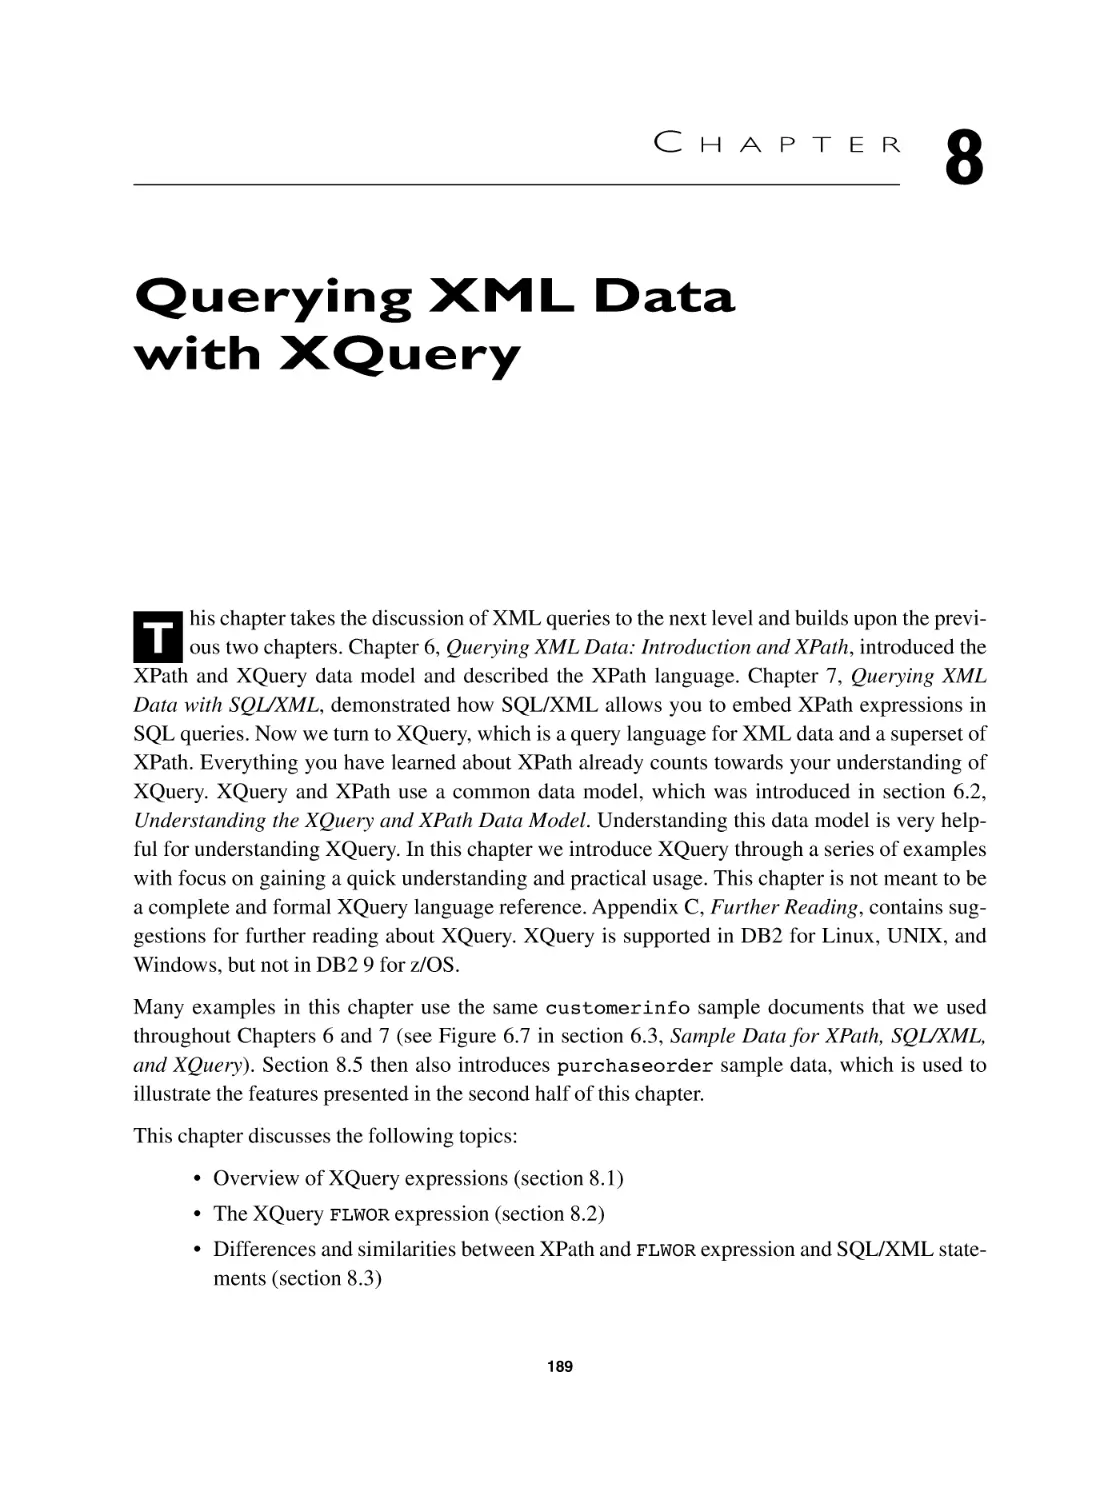 Chapter 8 Querying XML Data with XQuery